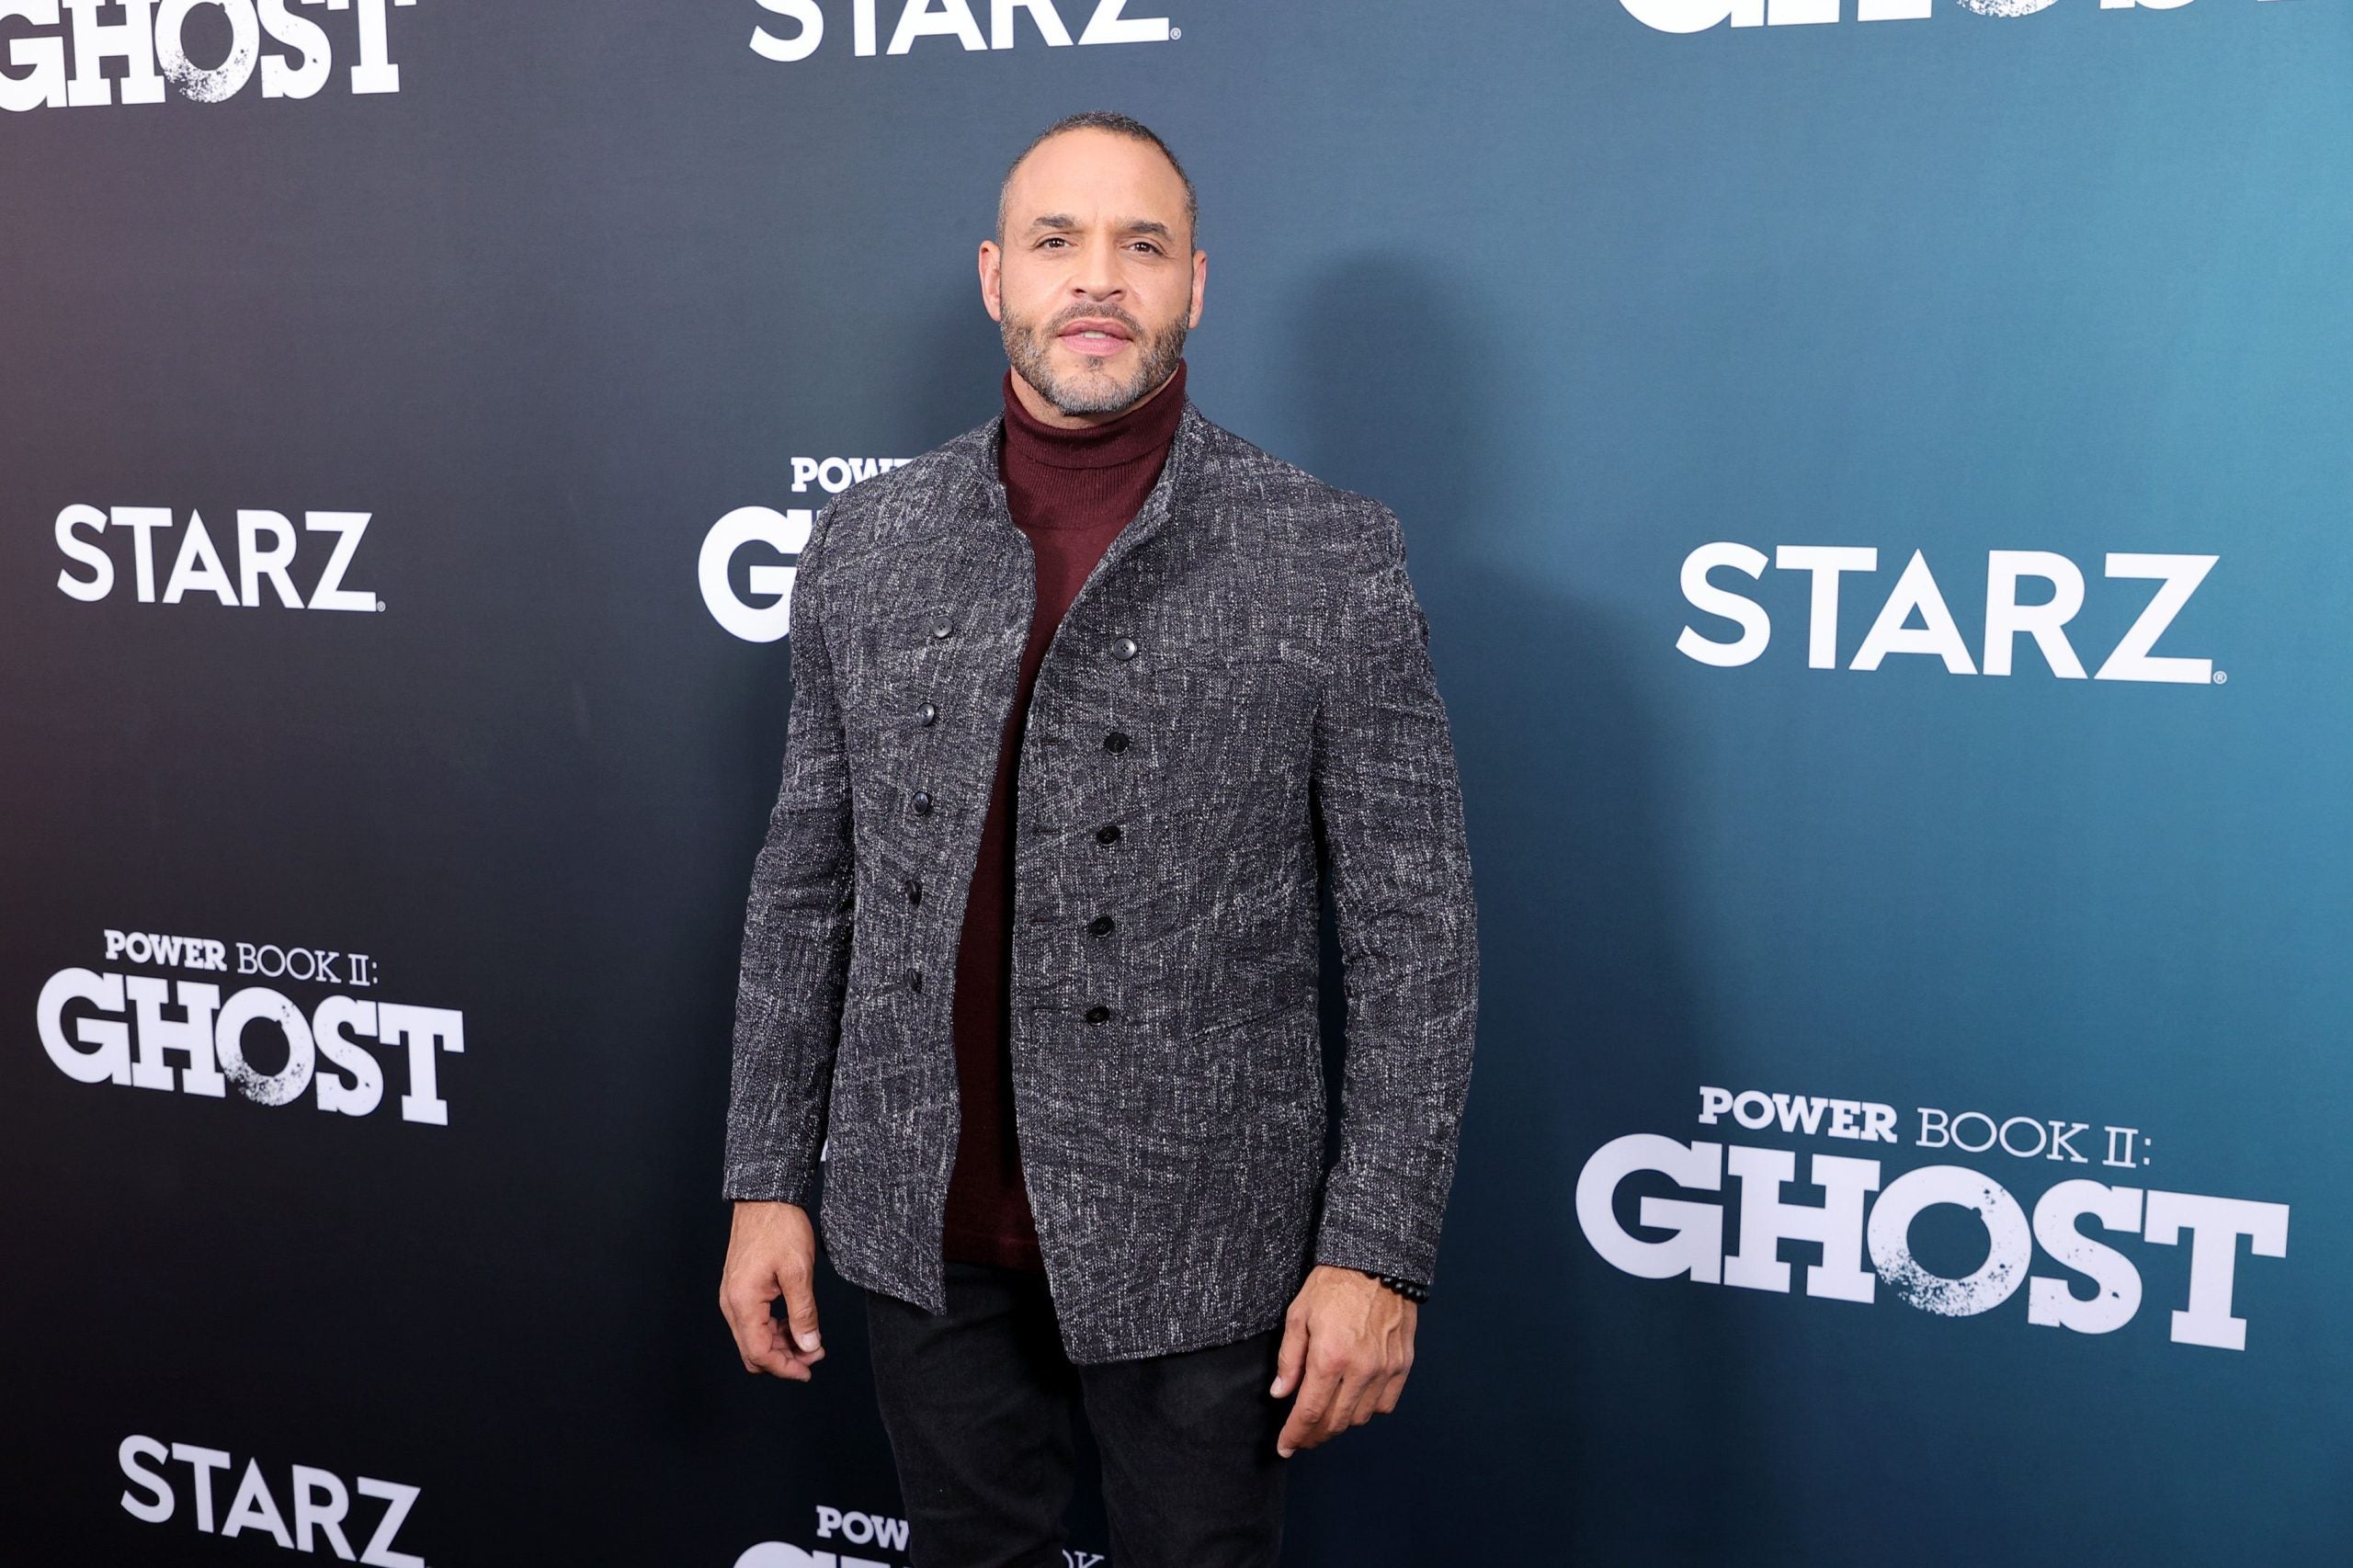 Stars Turned Up And Showed Out For Starz’s “Power Book II: Ghost” Premiere Event in NYC